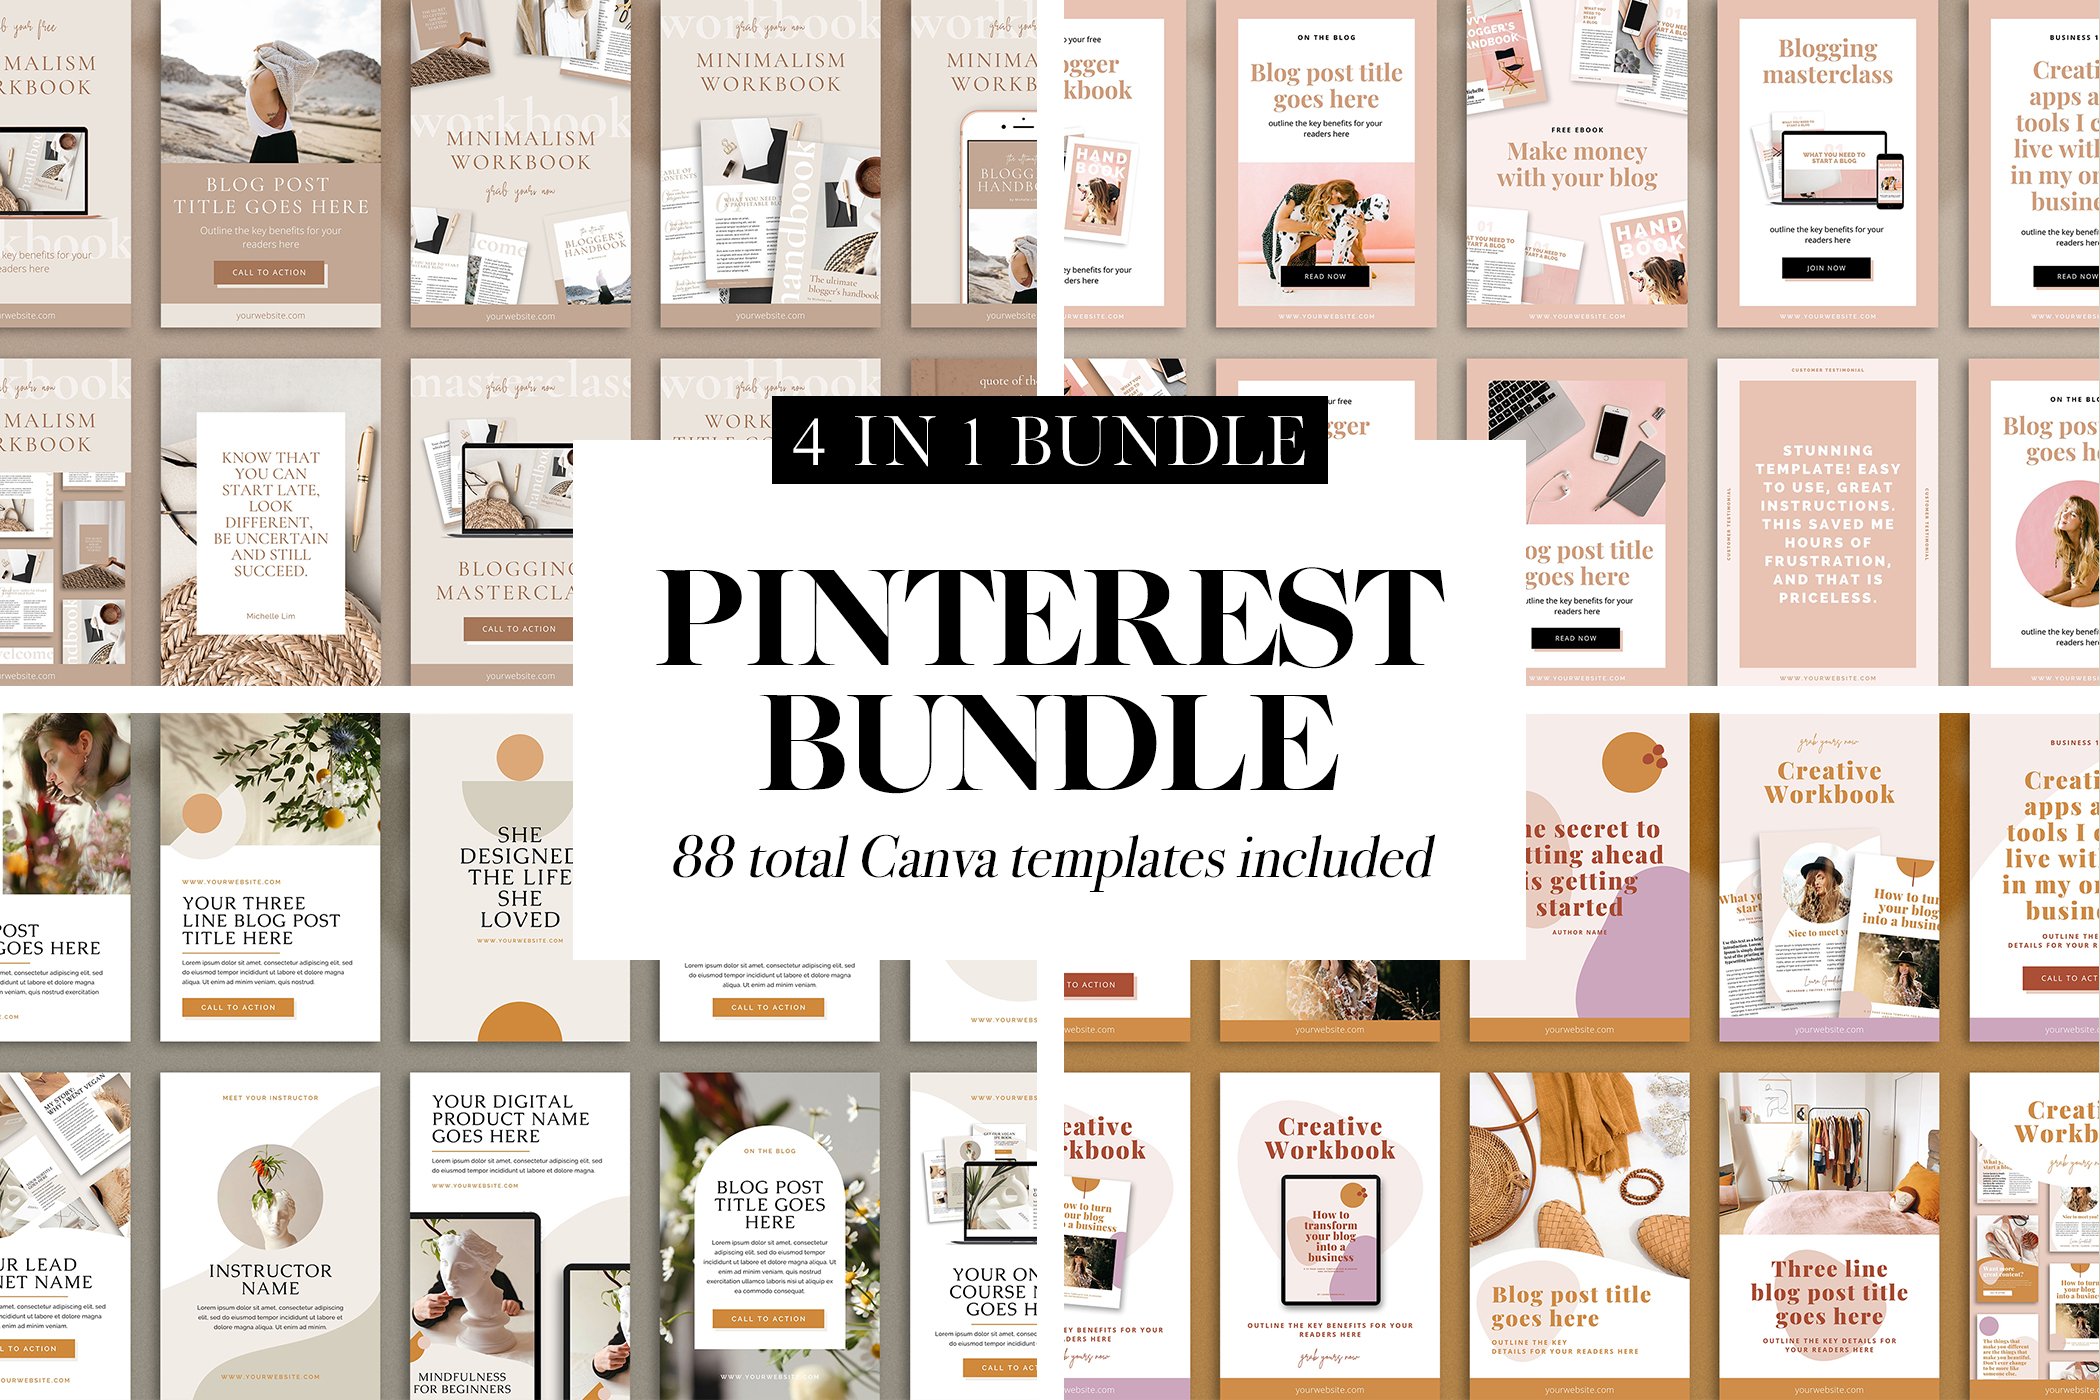 88 total Canva templates included.This bundle has a nice and modern design.